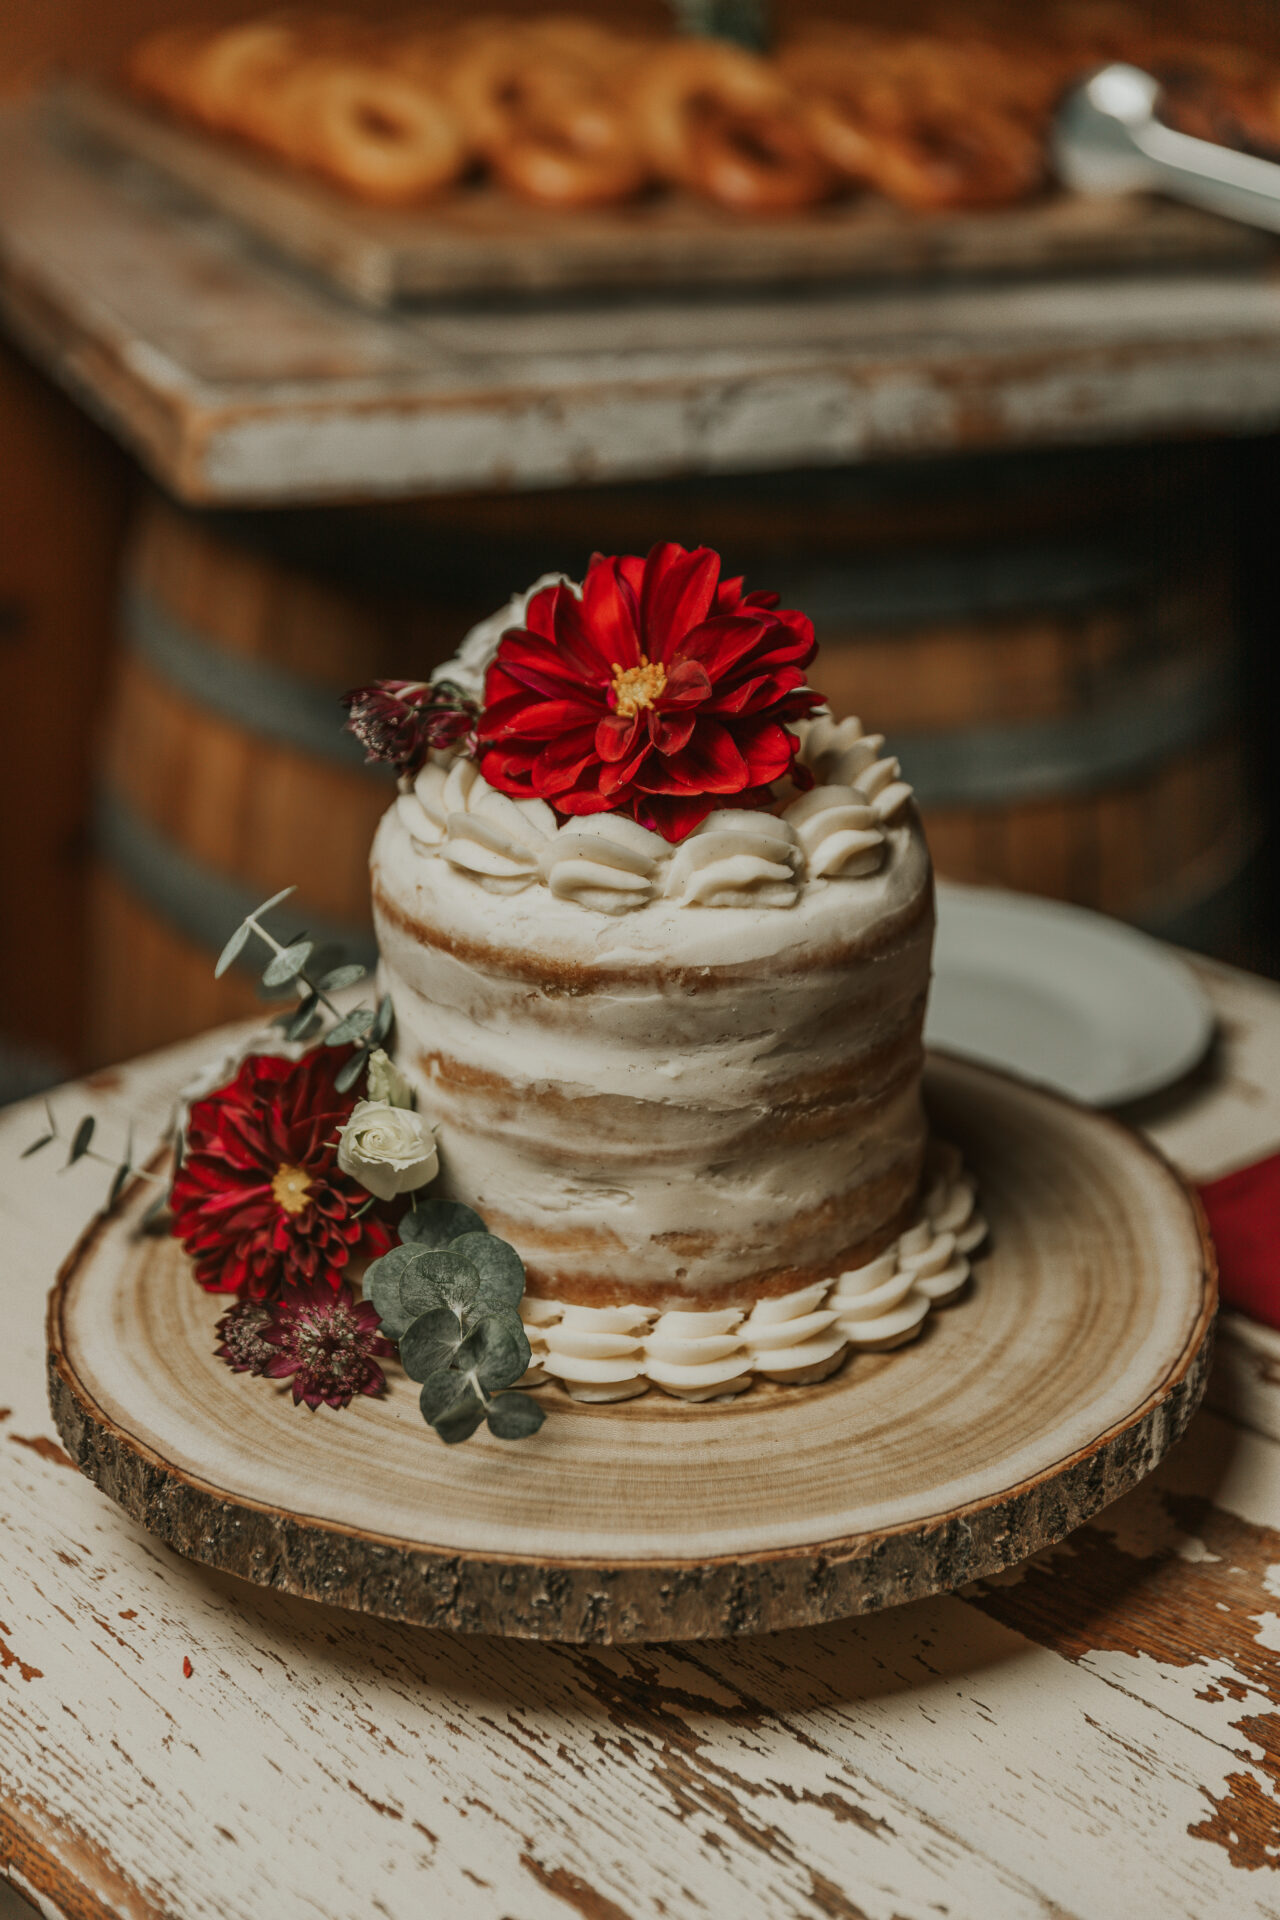 Wedding cake with red flower